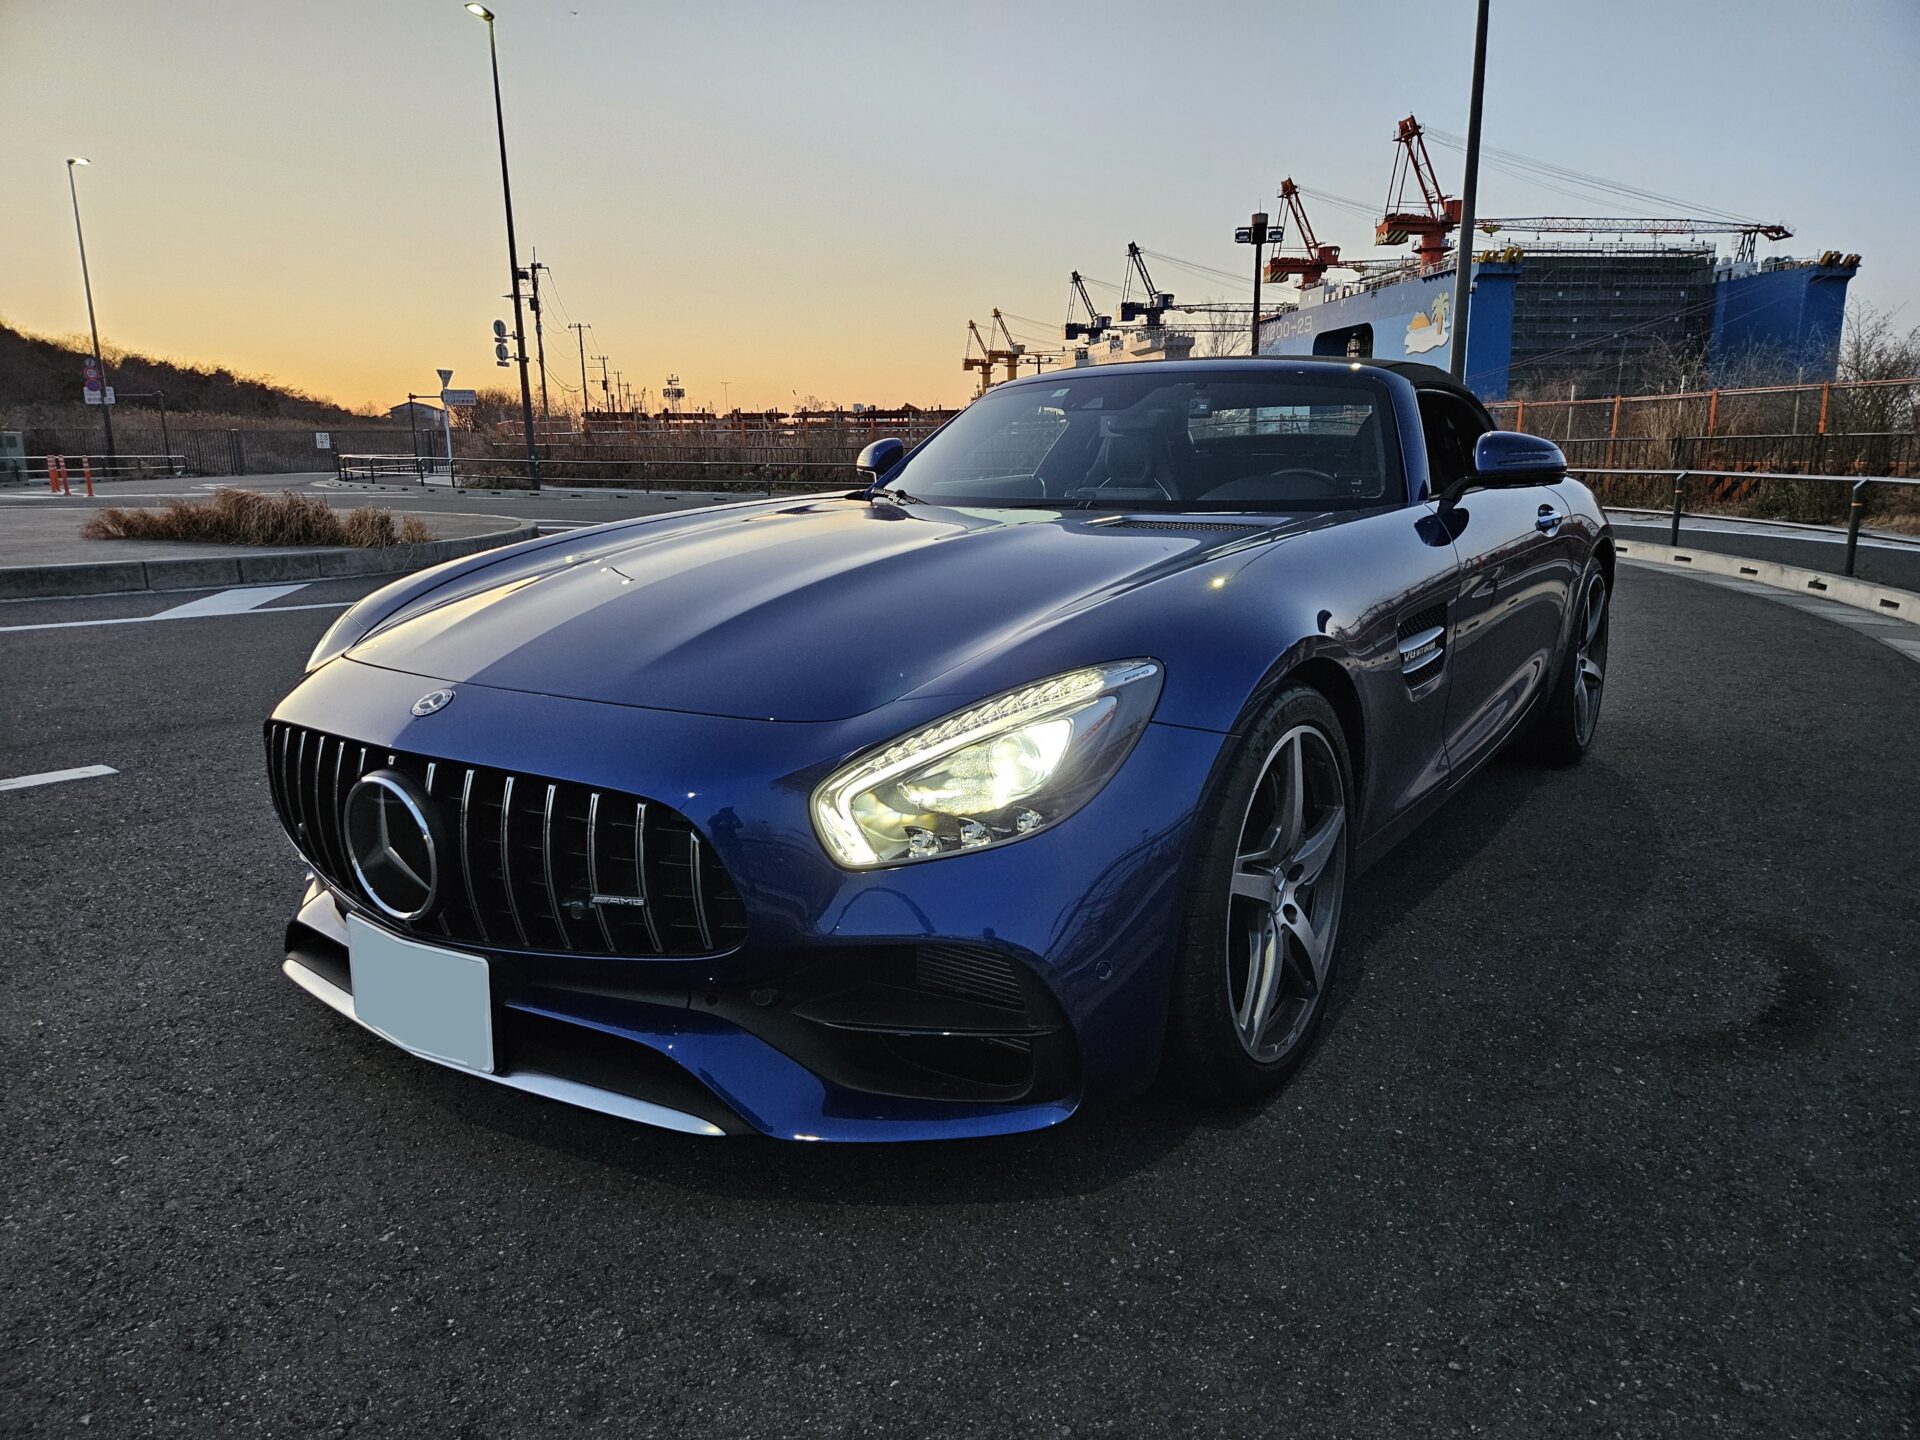 ECU tuning & bubbling enforcement☆ AMG GT Convertible 104 hp increase to 580 hp!